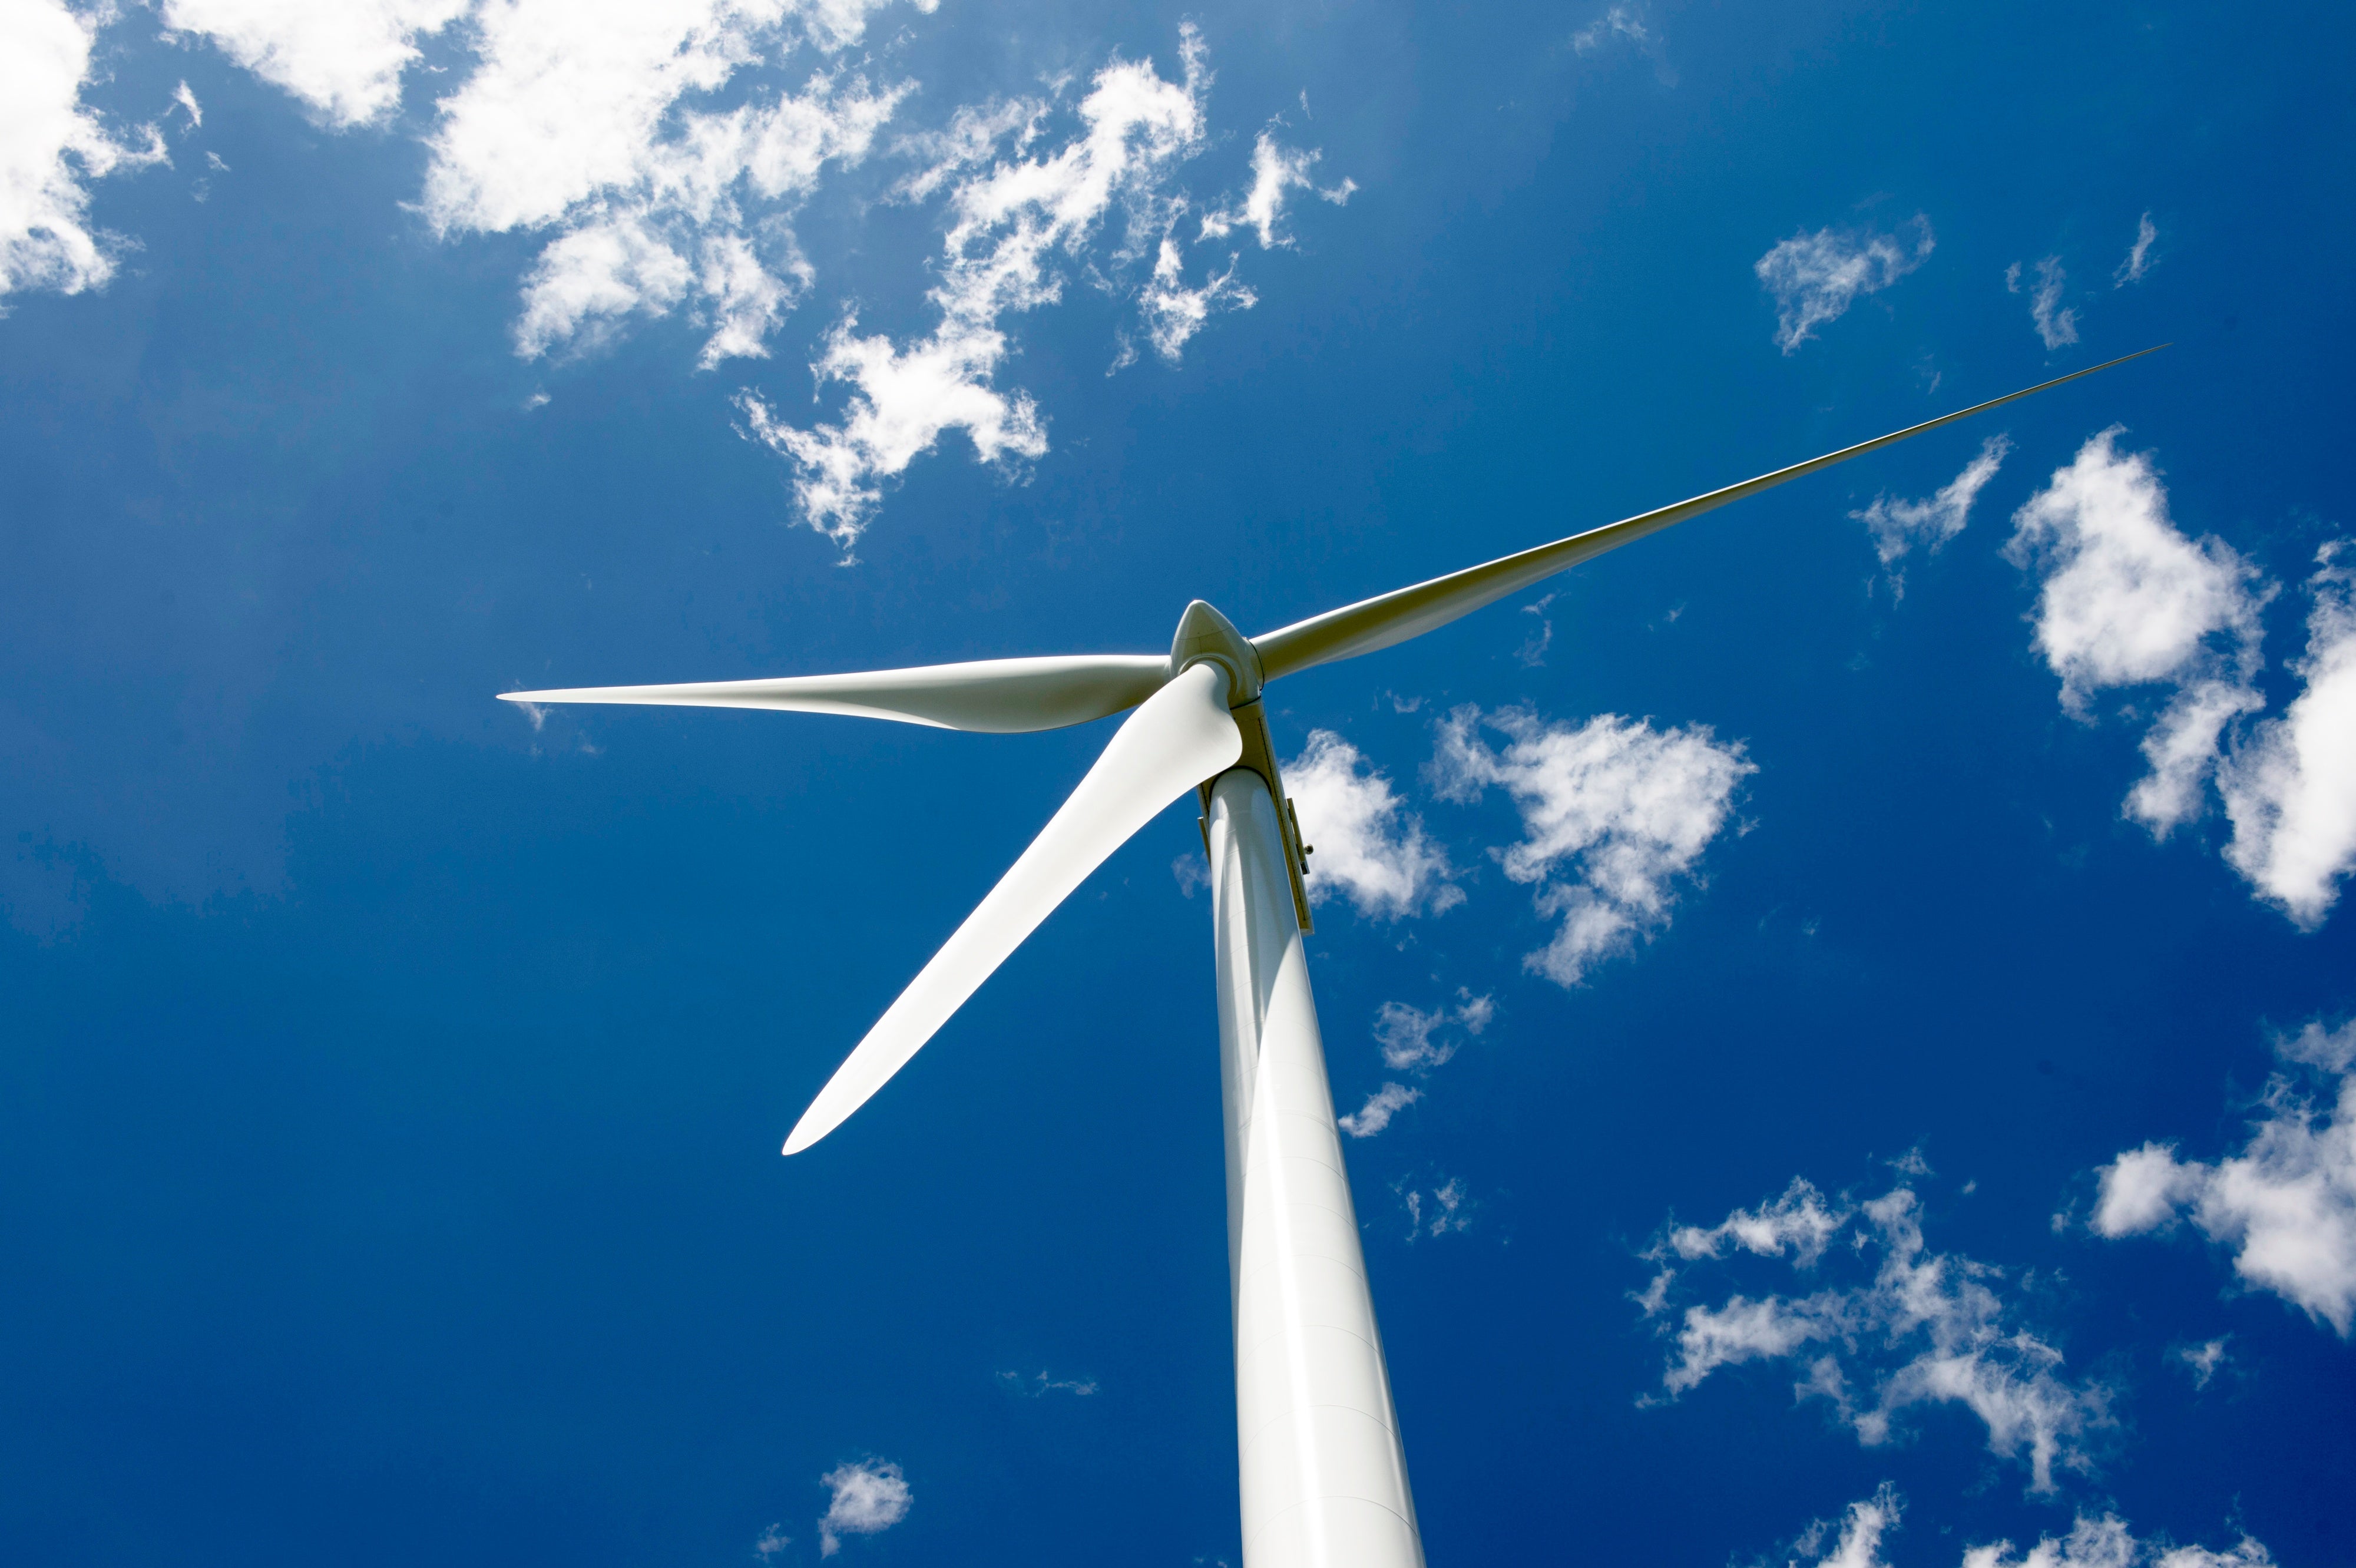 World S Largest Wind Turbine Would Be Taller Than The Empire State Building Scientific American